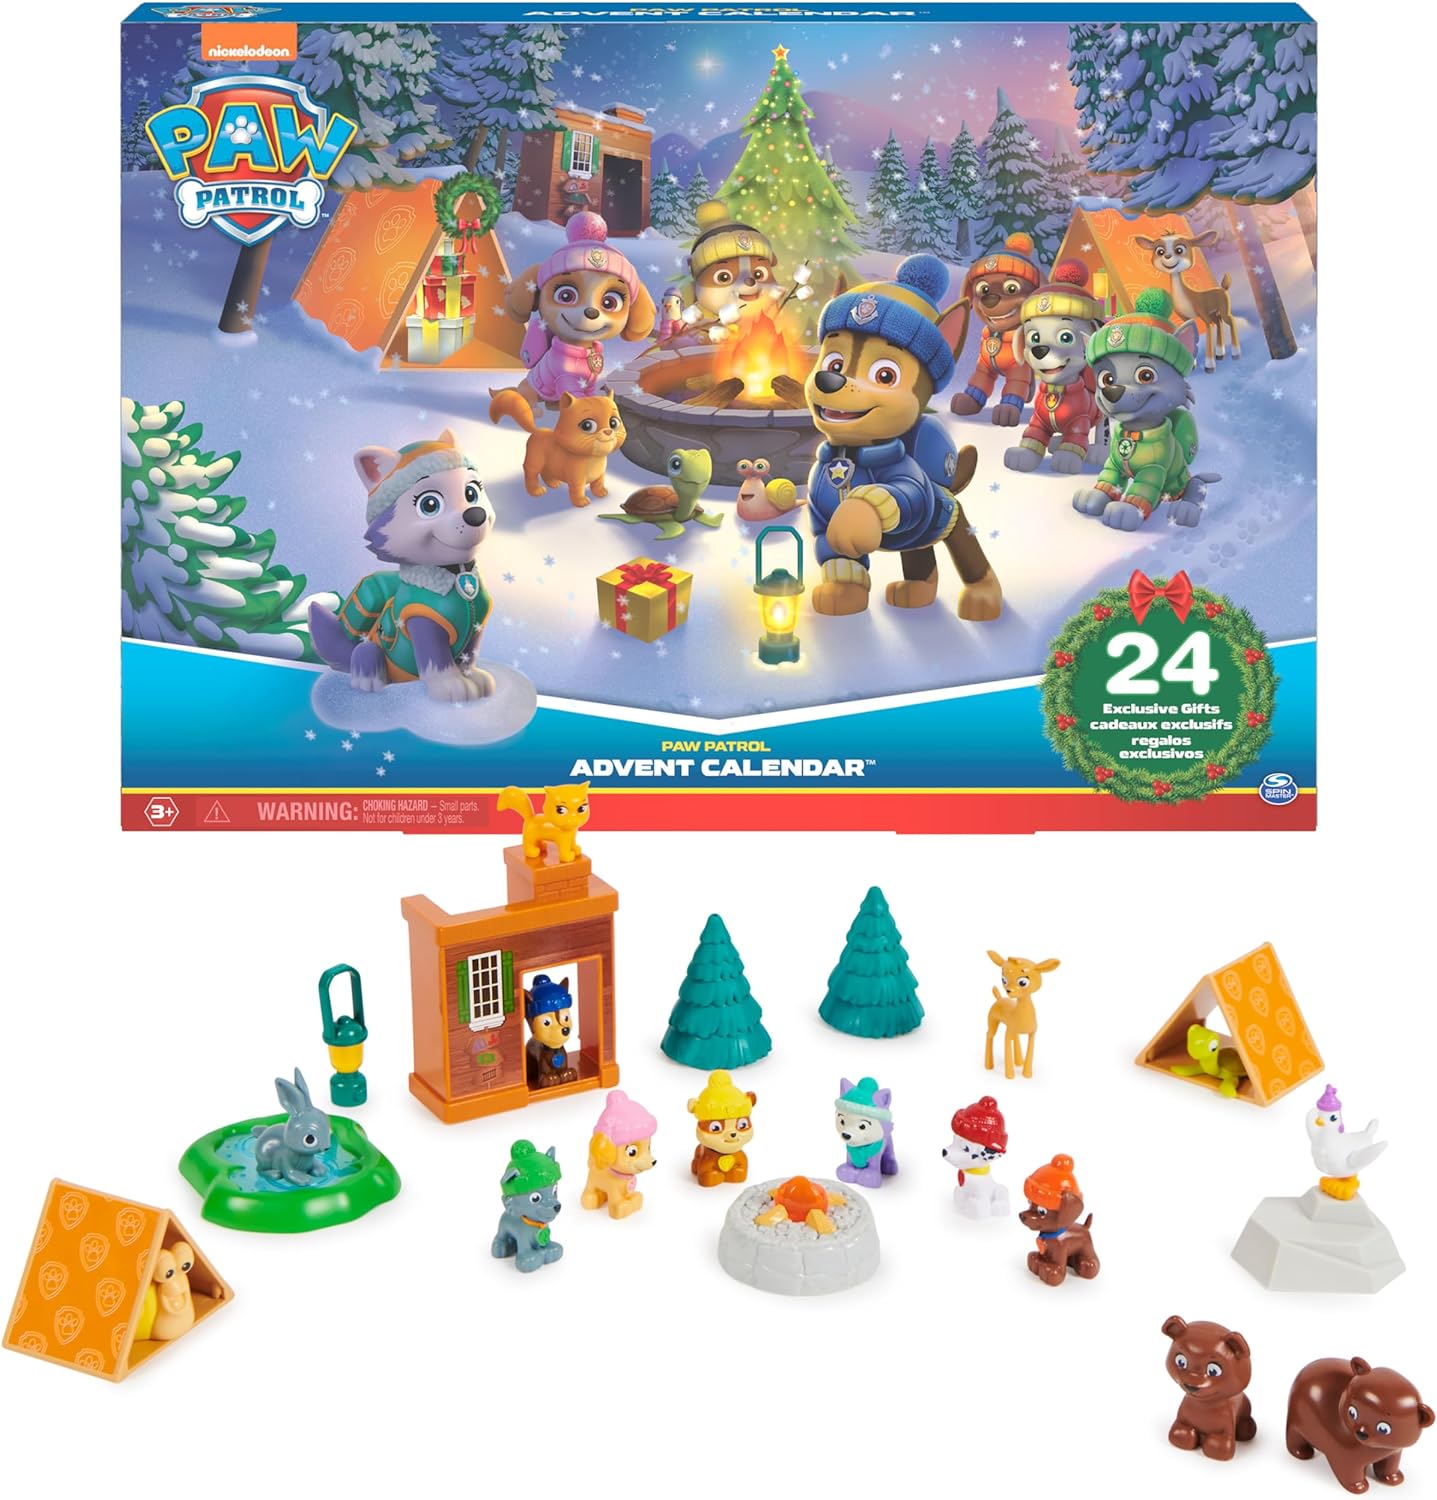 PAW Patrol Advent Calendar 2023 - 24 Toy surprises for an imaginative winter world, 7 puppy figures, animal figures and accessories, from 3 years